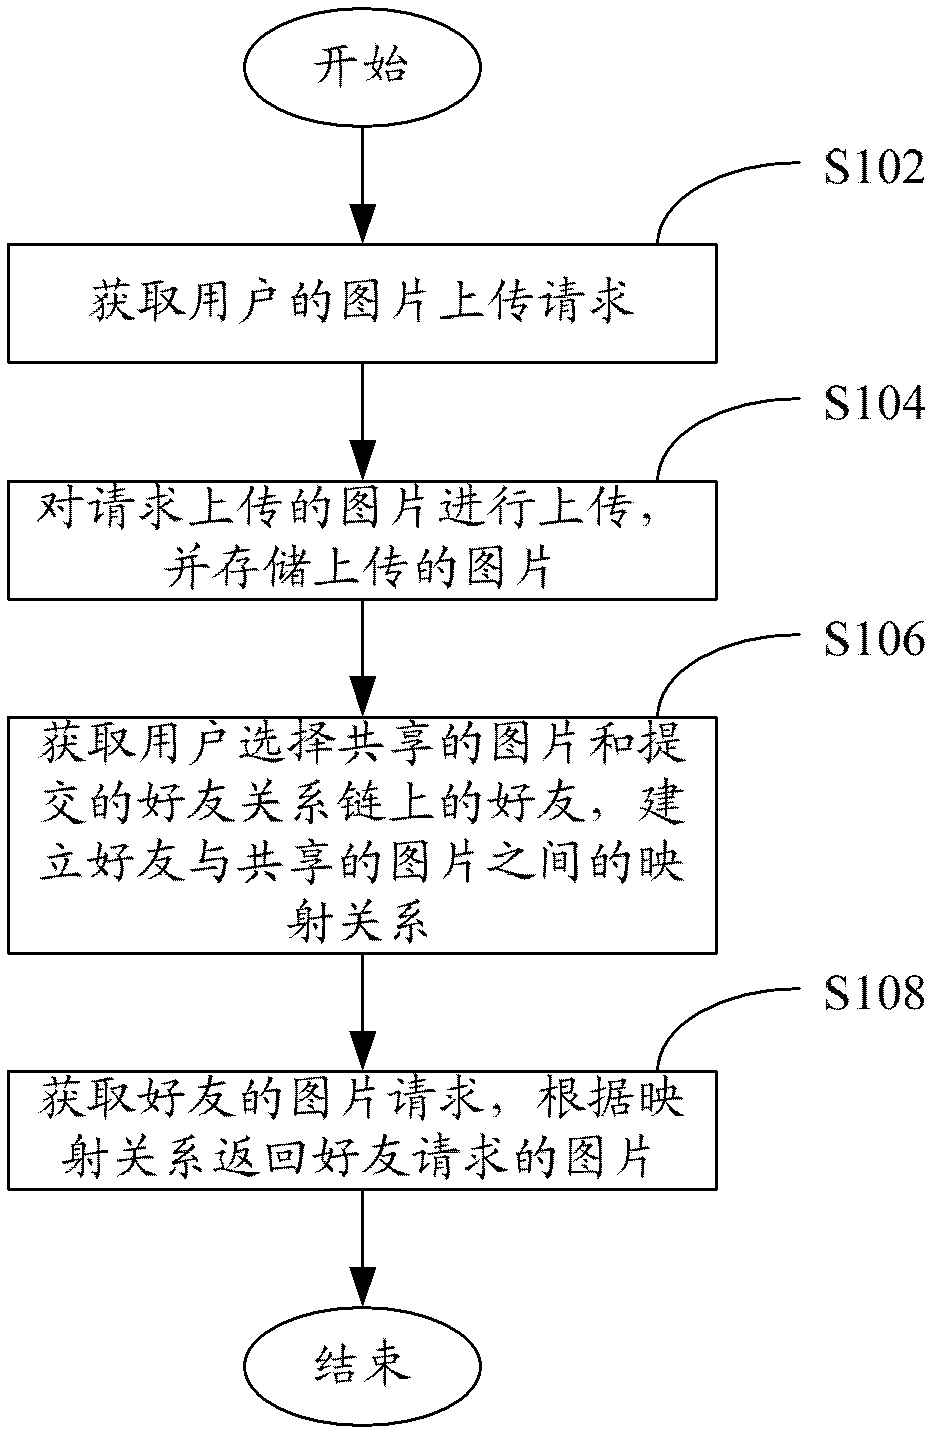 Picture sharing method and system